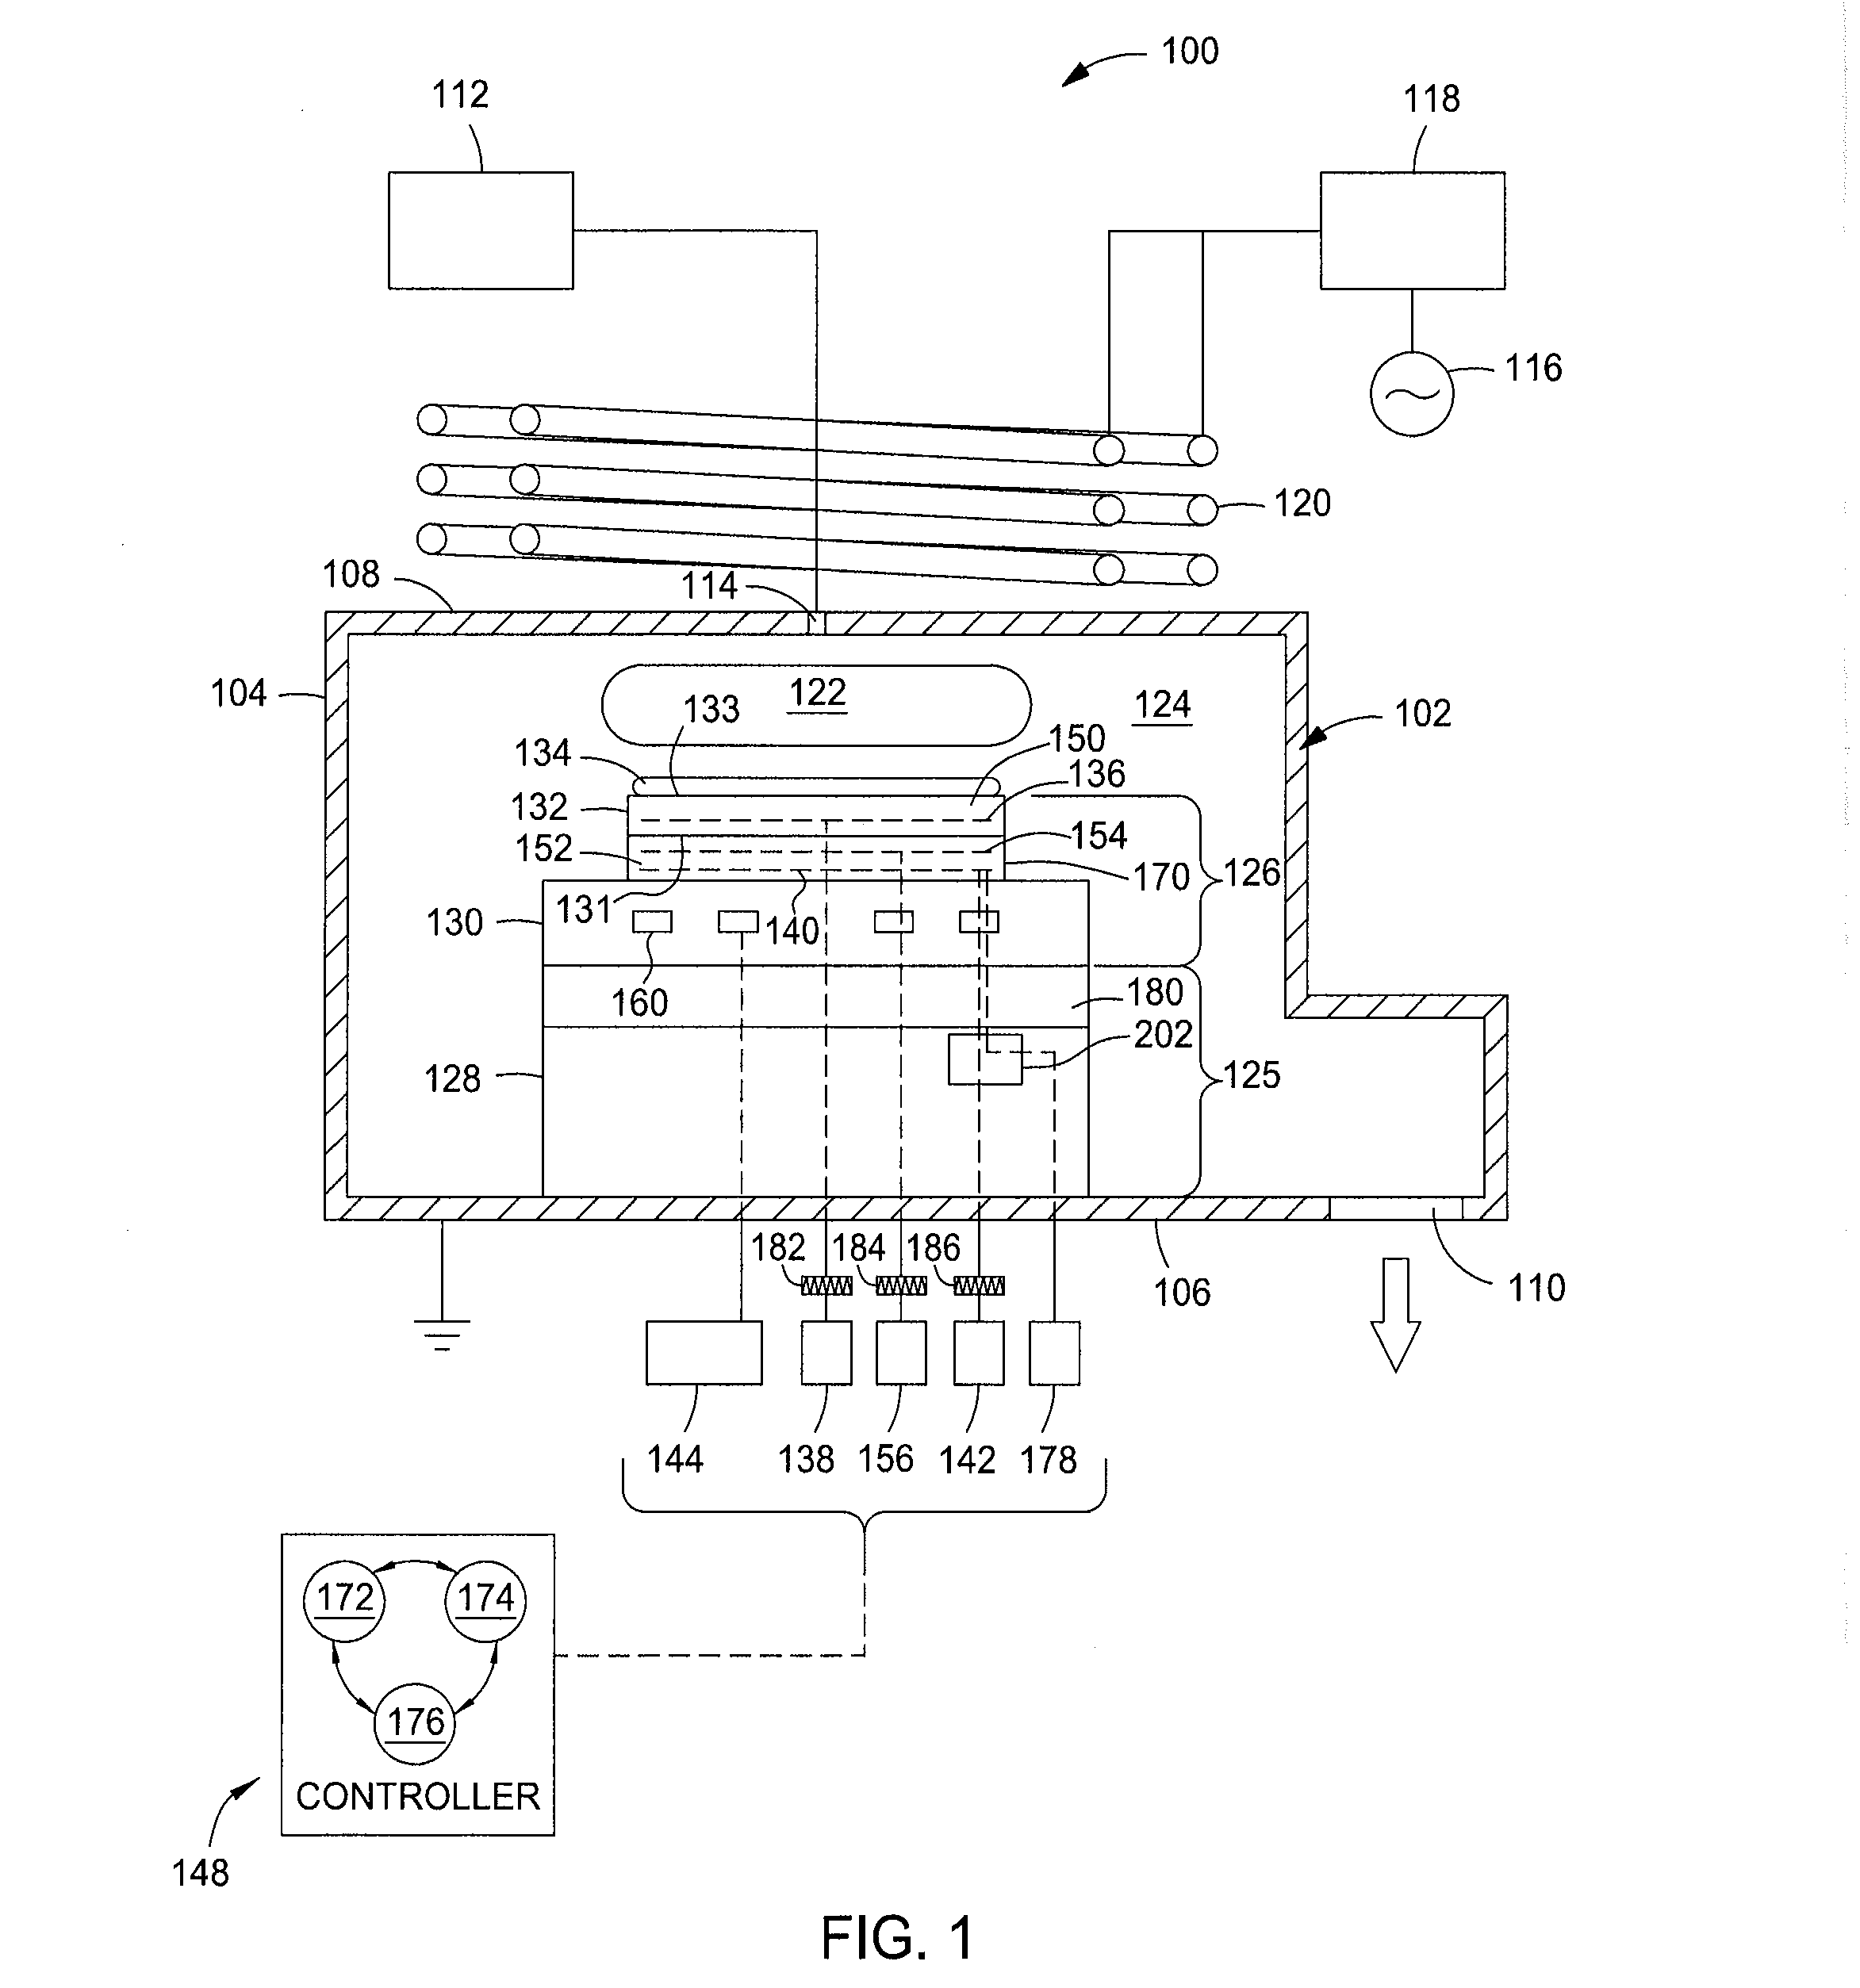 Tunable temperature controlled substrate support assembly